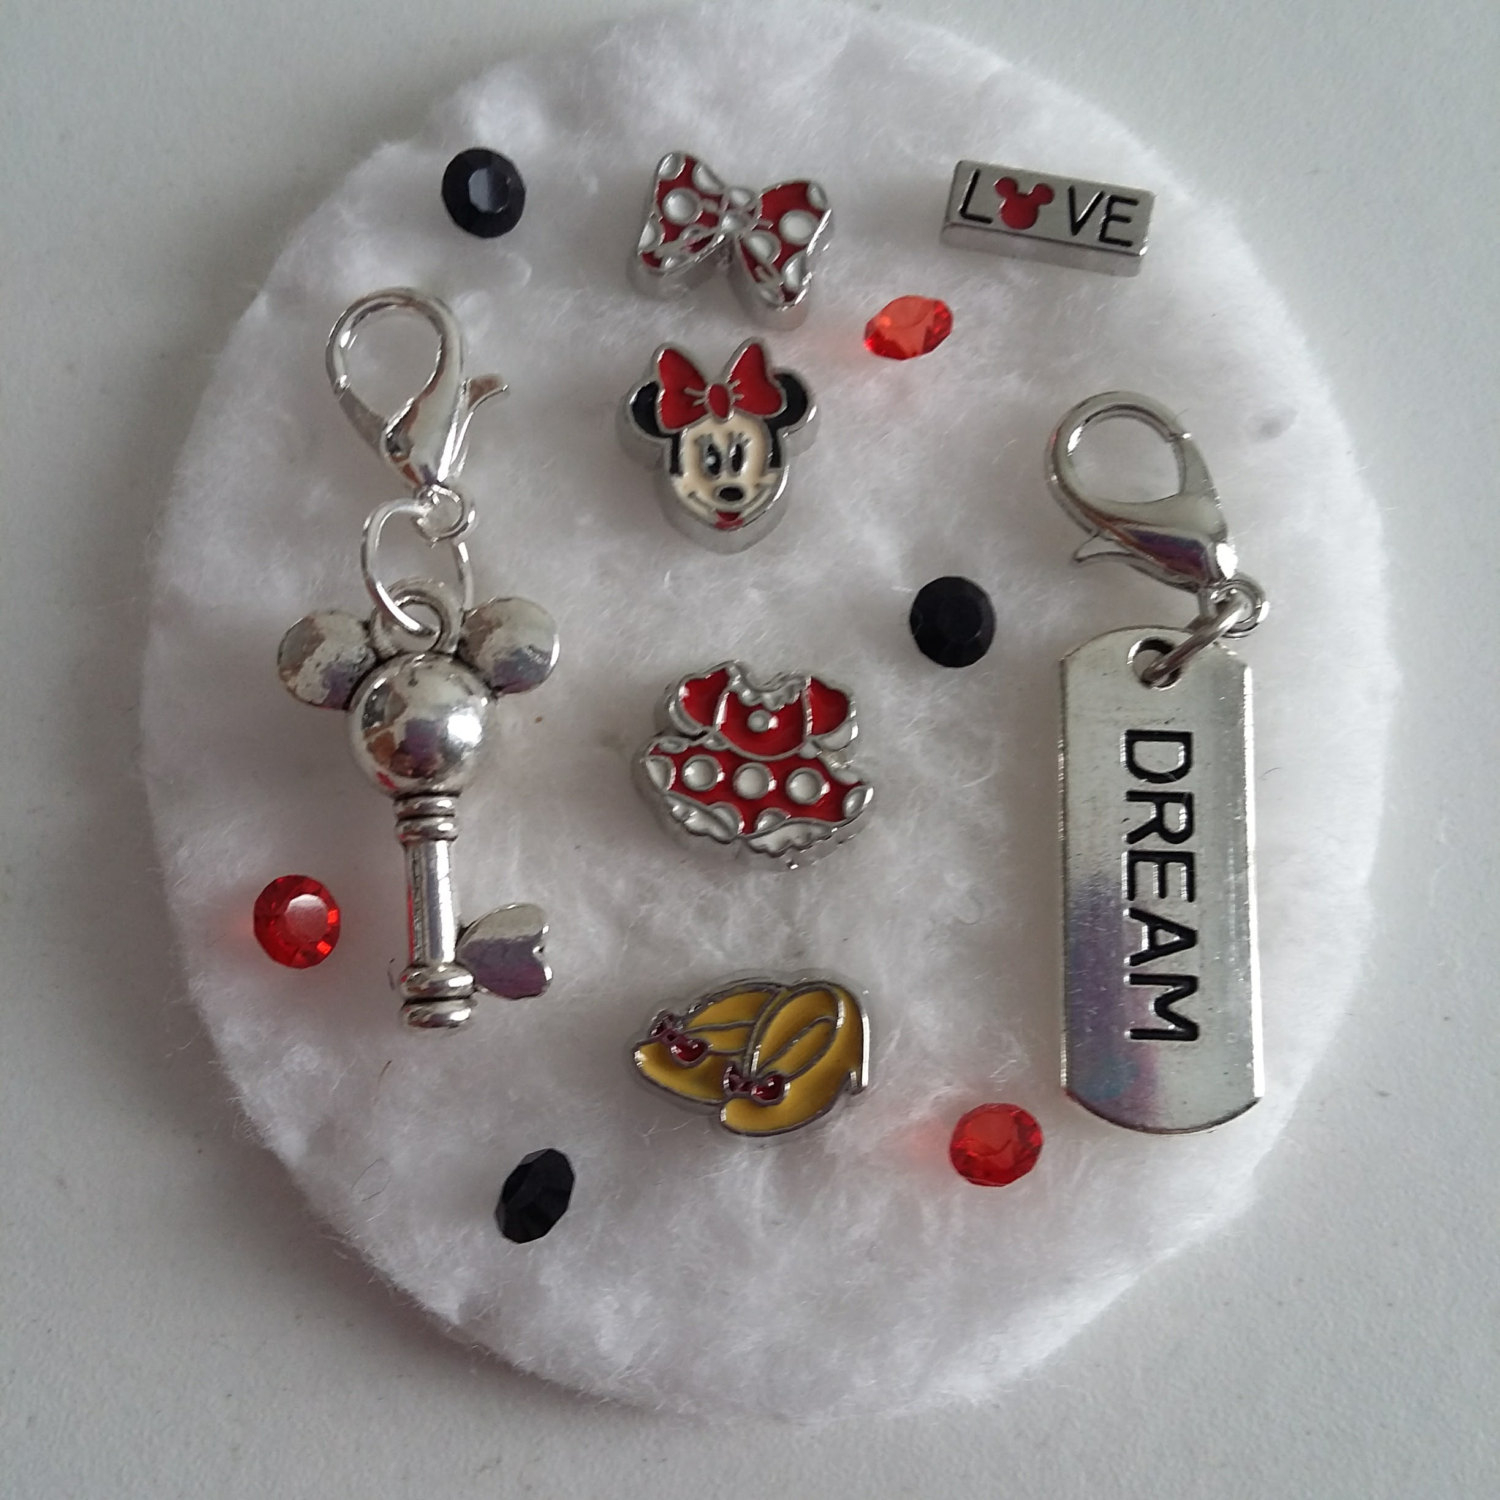 Origami Owl Tracking Who Doesnt Love Minnie Charm Collections Will Fit 30mm Lockets Including Origami Owl And South Hill Sent With Tracking Number